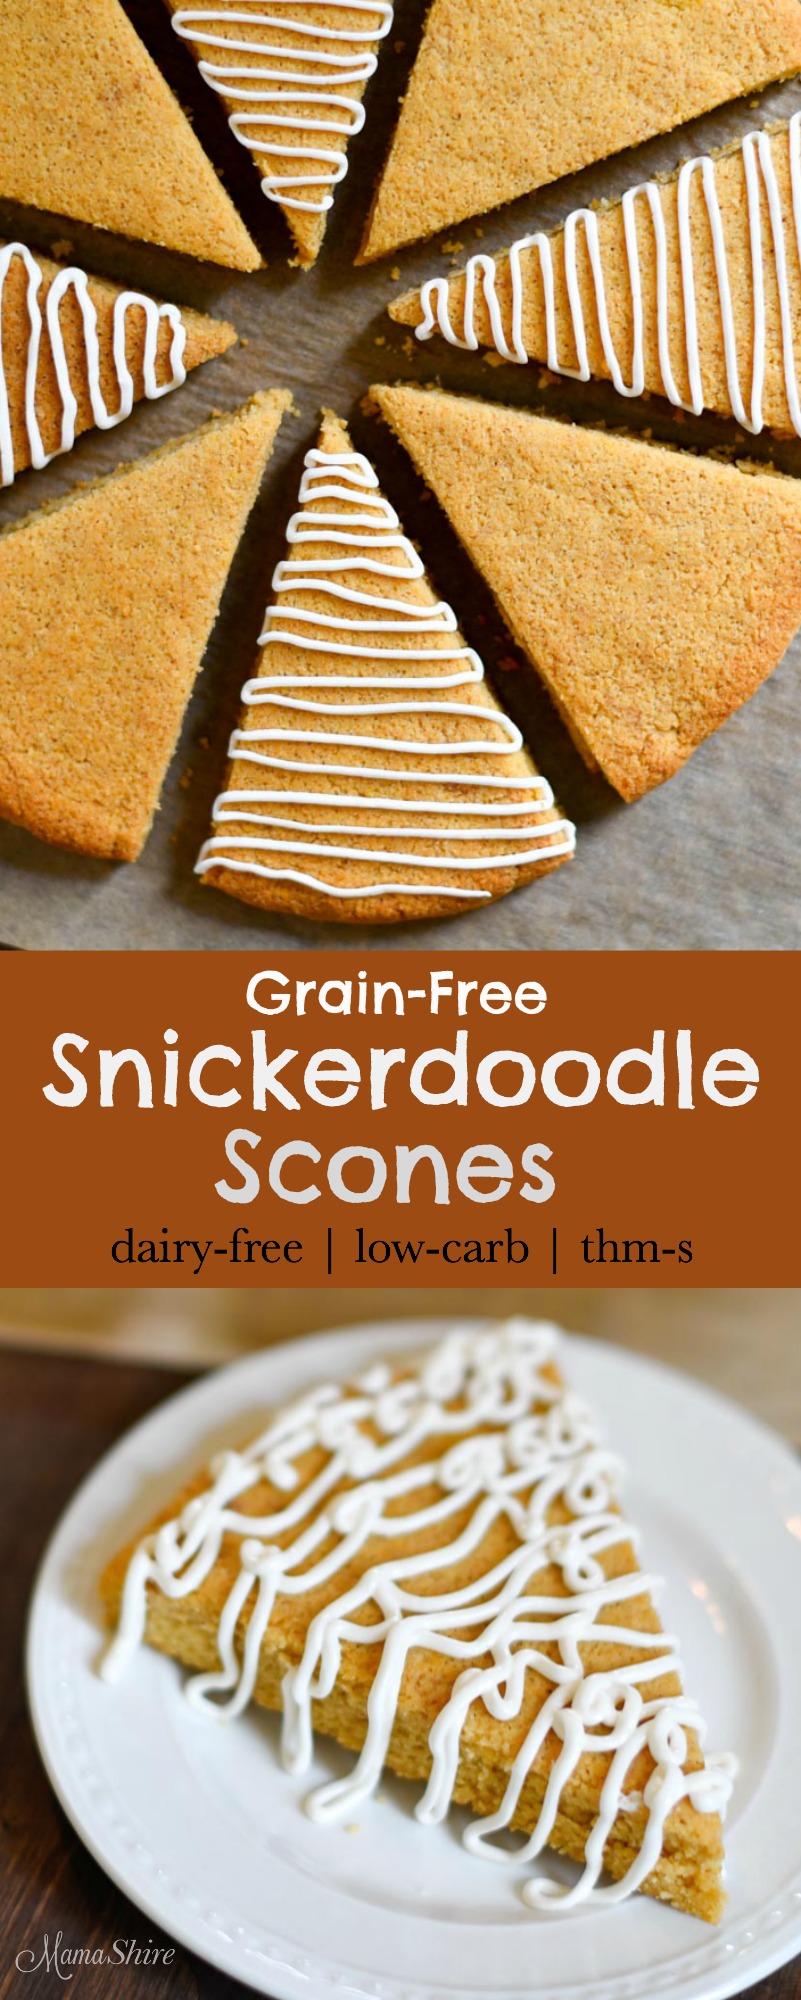 Grain-Free Snickerdoodle Scones - Gluten-free, Dairy-free, Sugar-free, THM-S, Low-carb